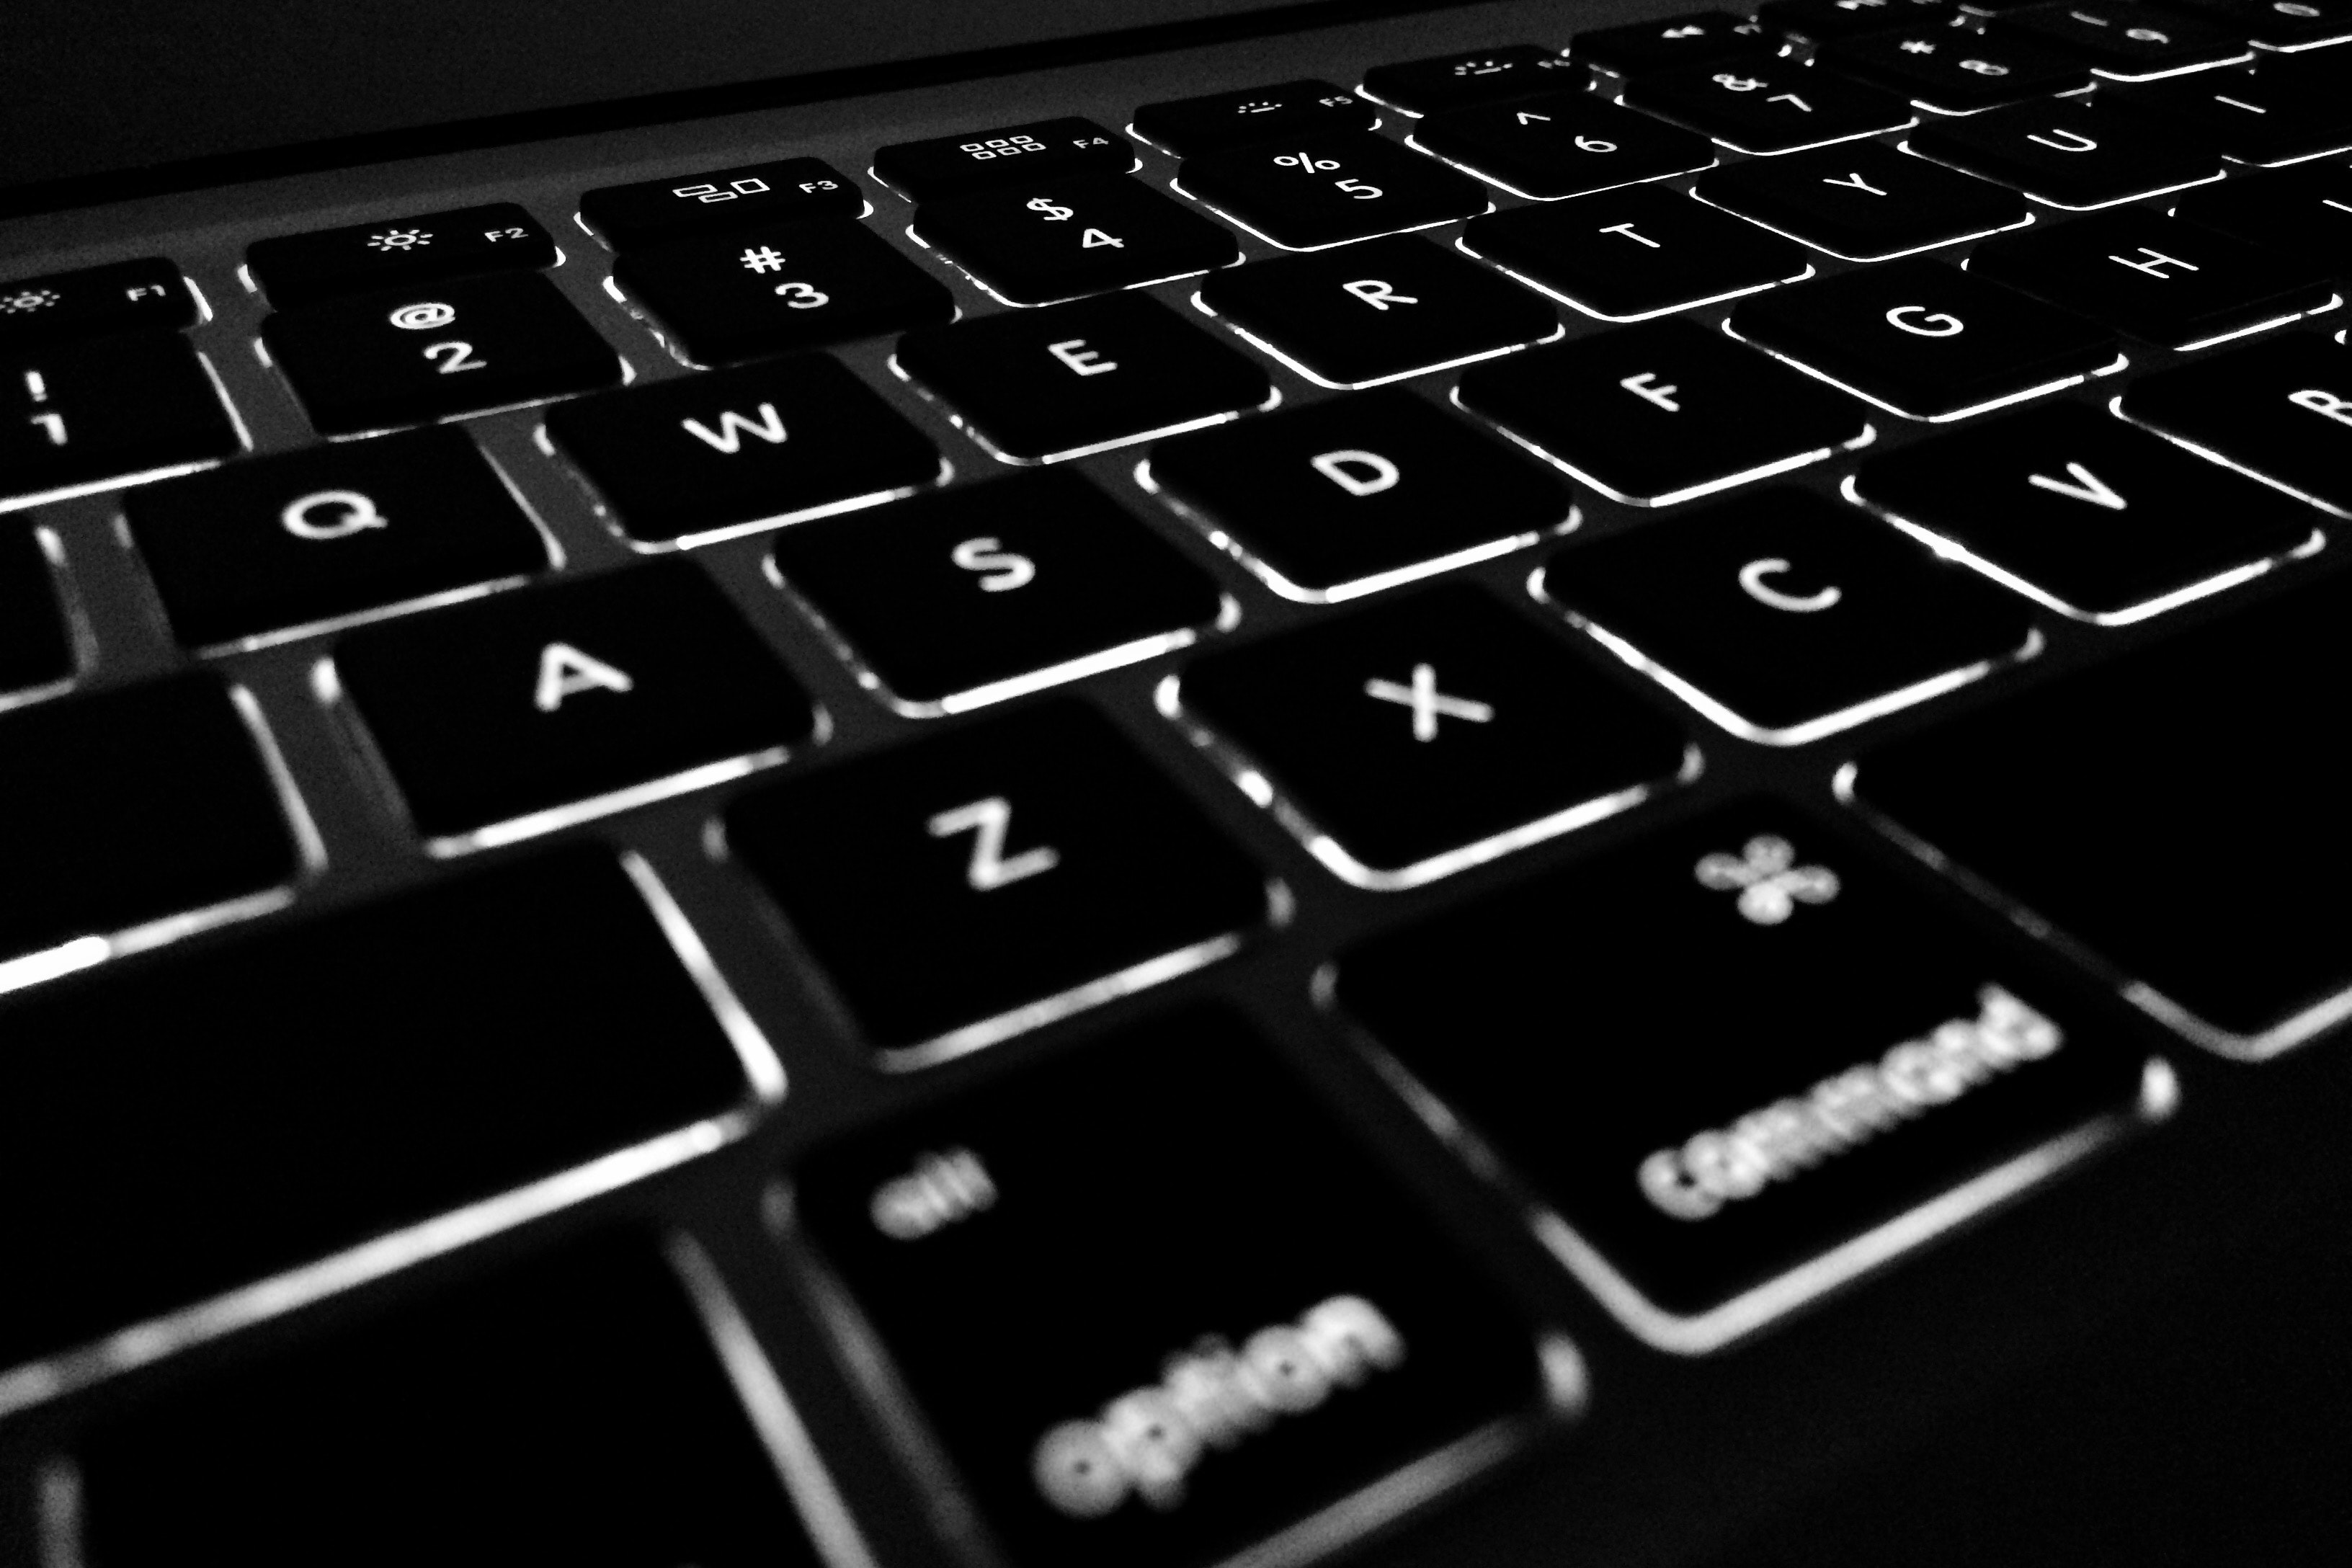 stock photo of black qwerty keyboard with backlit white letters